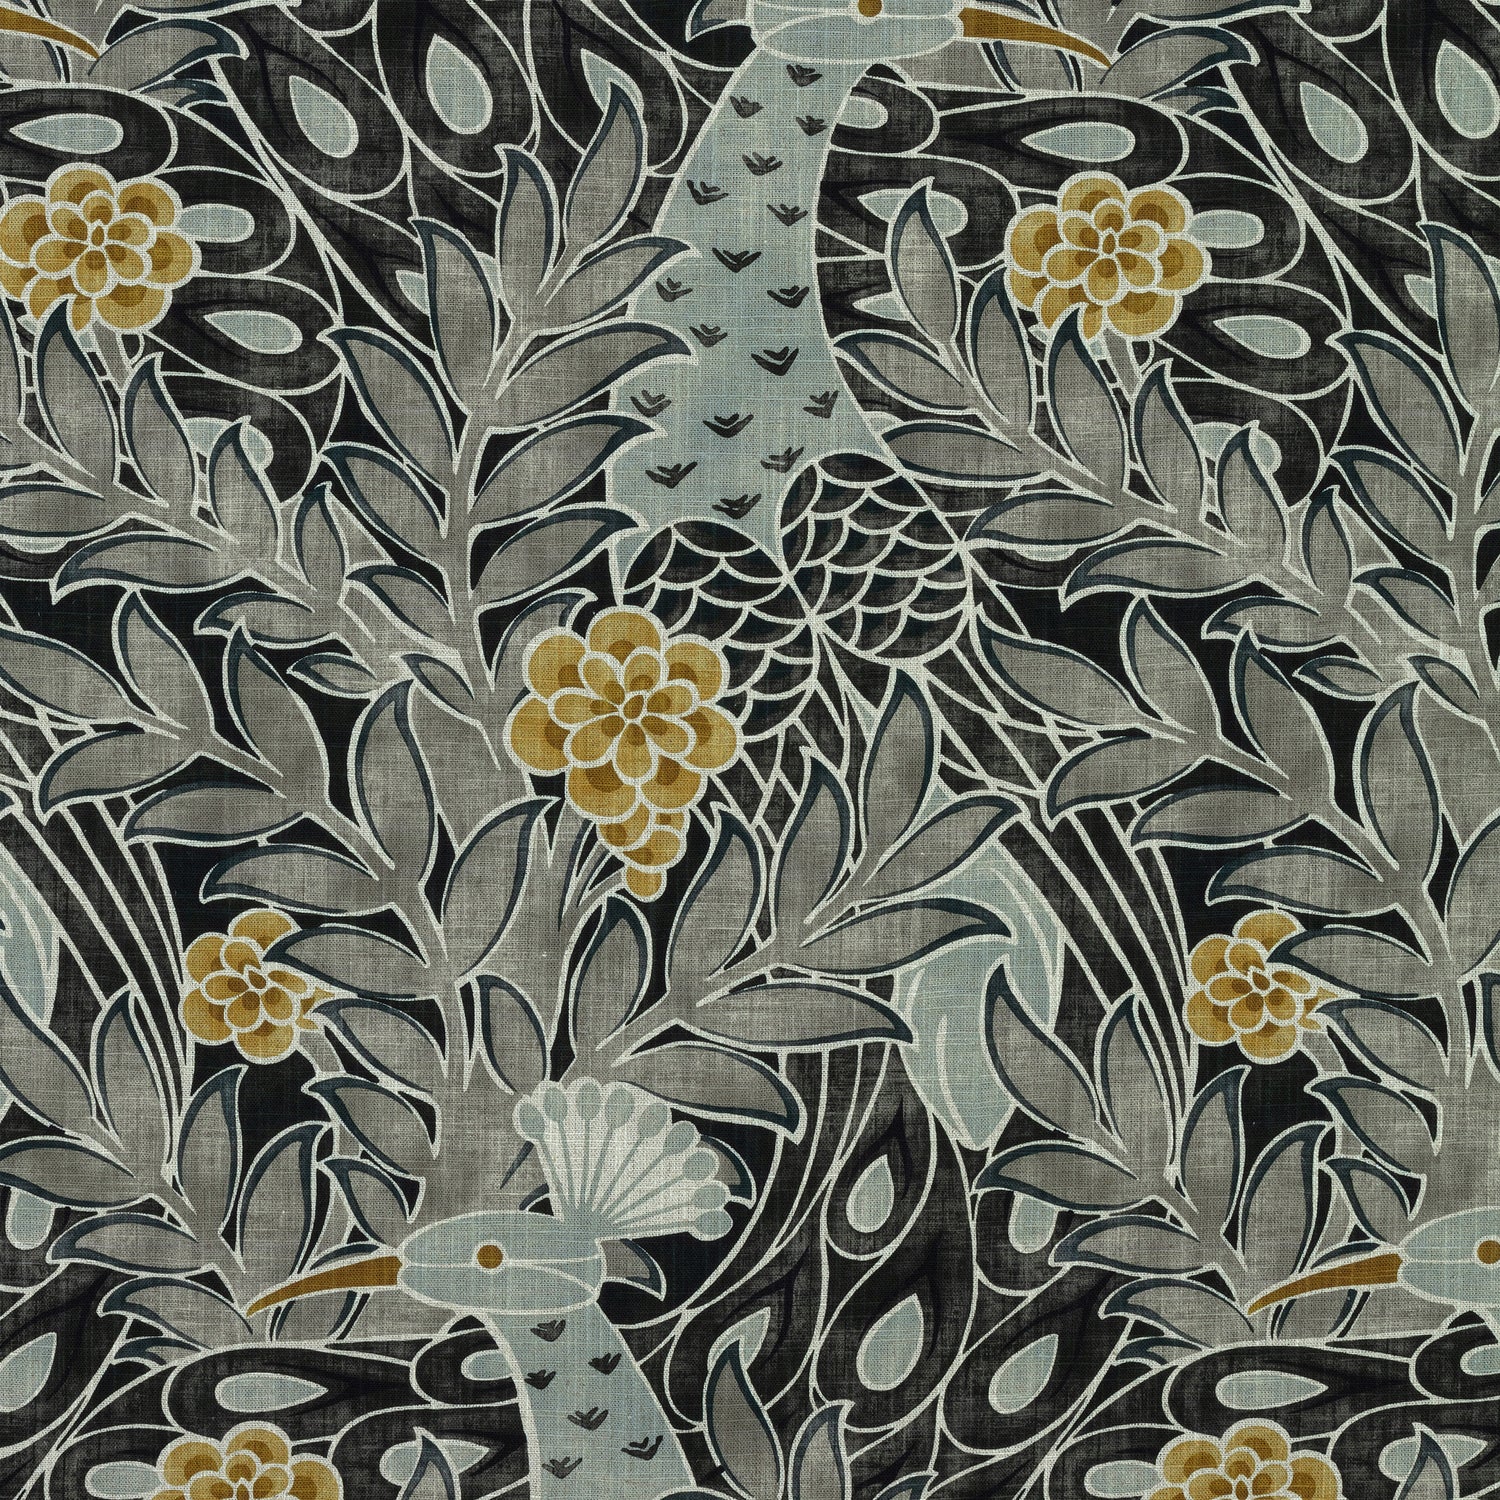 Desmond fabric in black and charcoal color - pattern number F92919 - by Thibaut in the Paramount collection